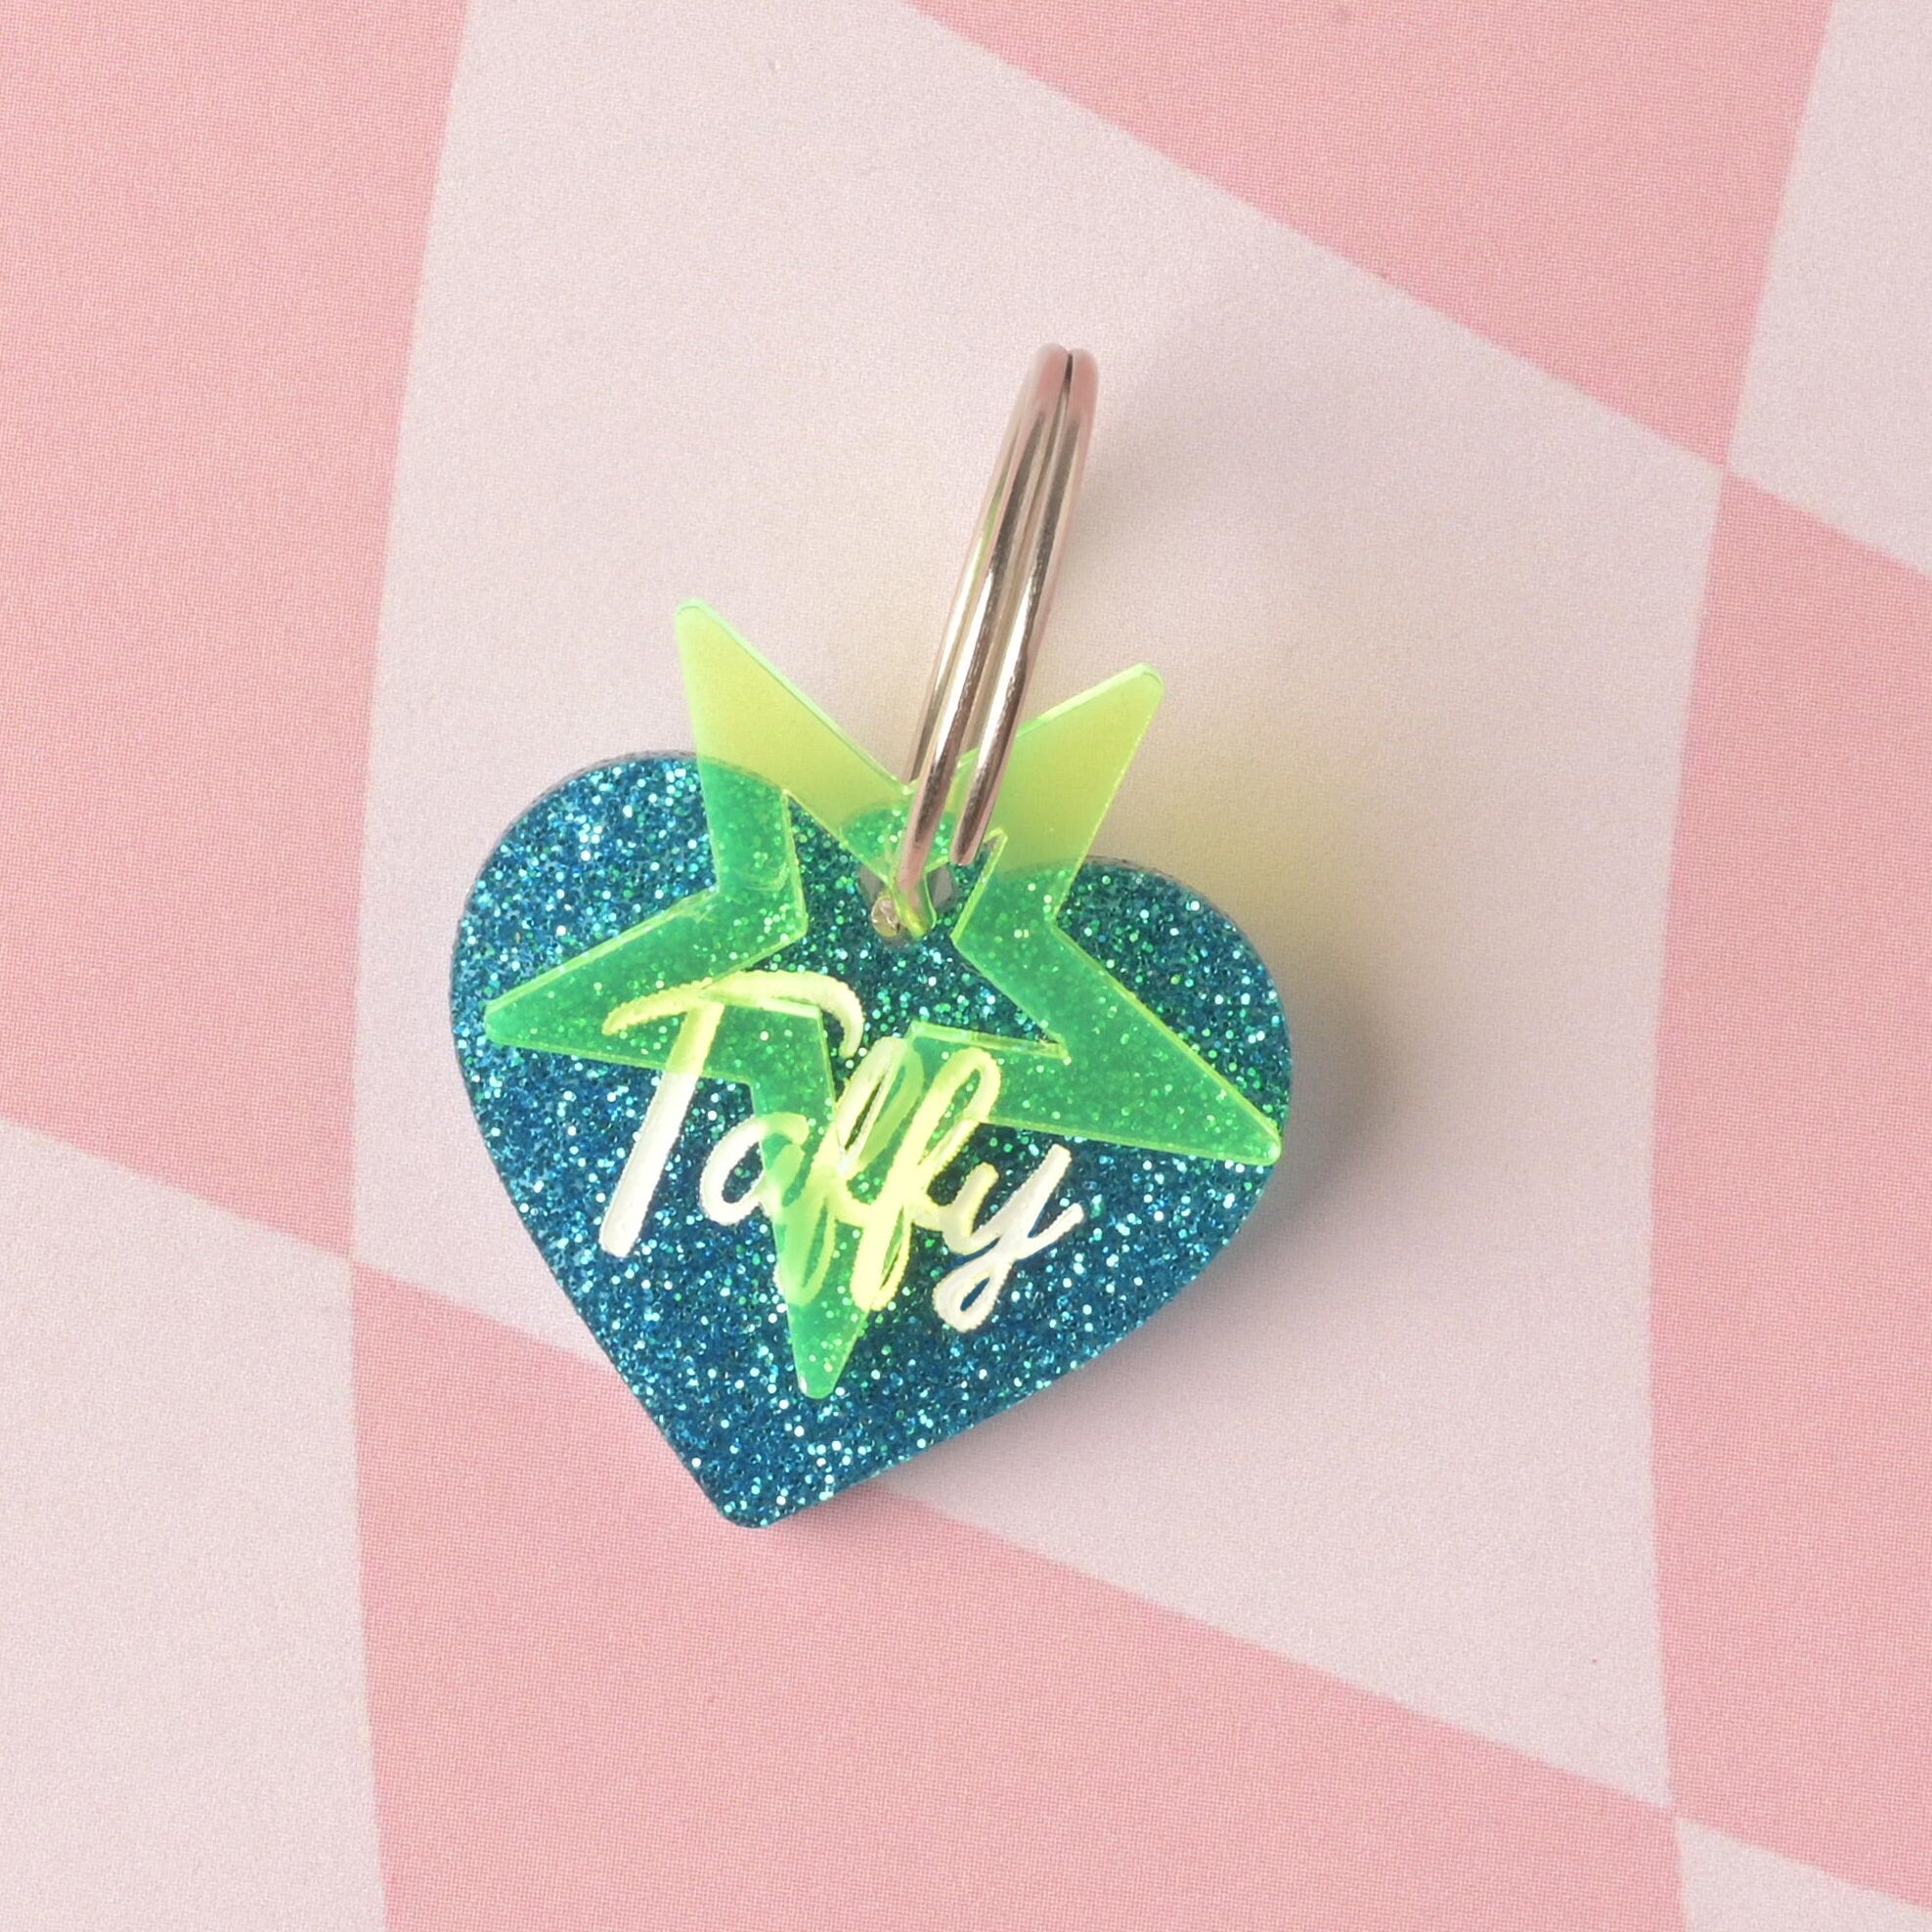 Barbie Inspired Personalized Pet Tag, Taffy Heart Shaped Tag for Cats and Dogs, Limited Edition, Custom Name and Contact Info Engraved